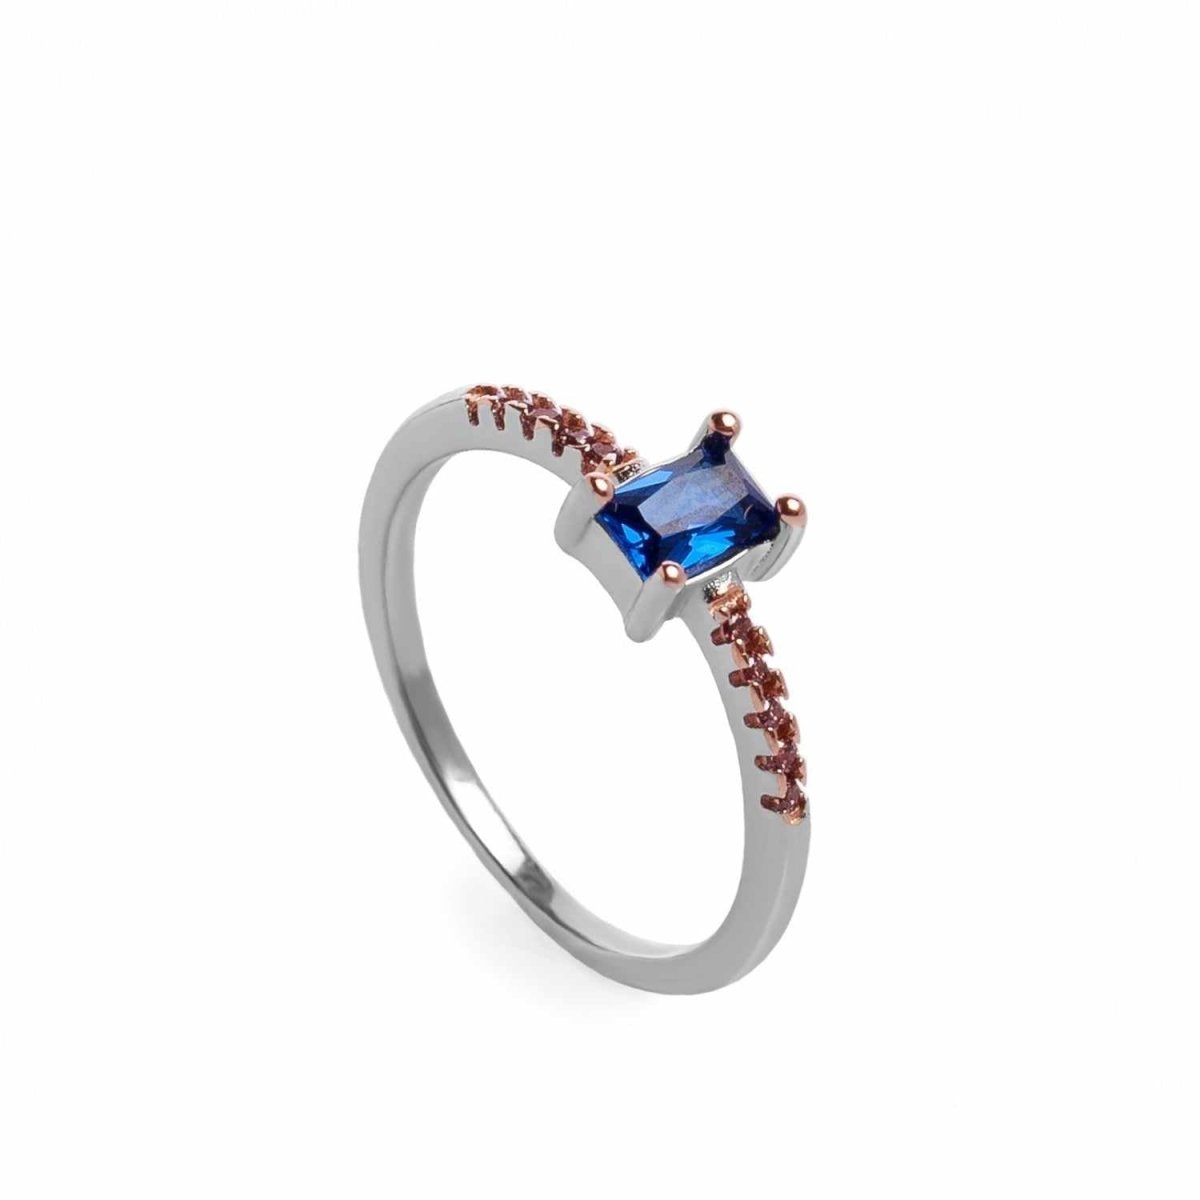 Ring - Rings - Thin rings with central rectangular design in azurite tone